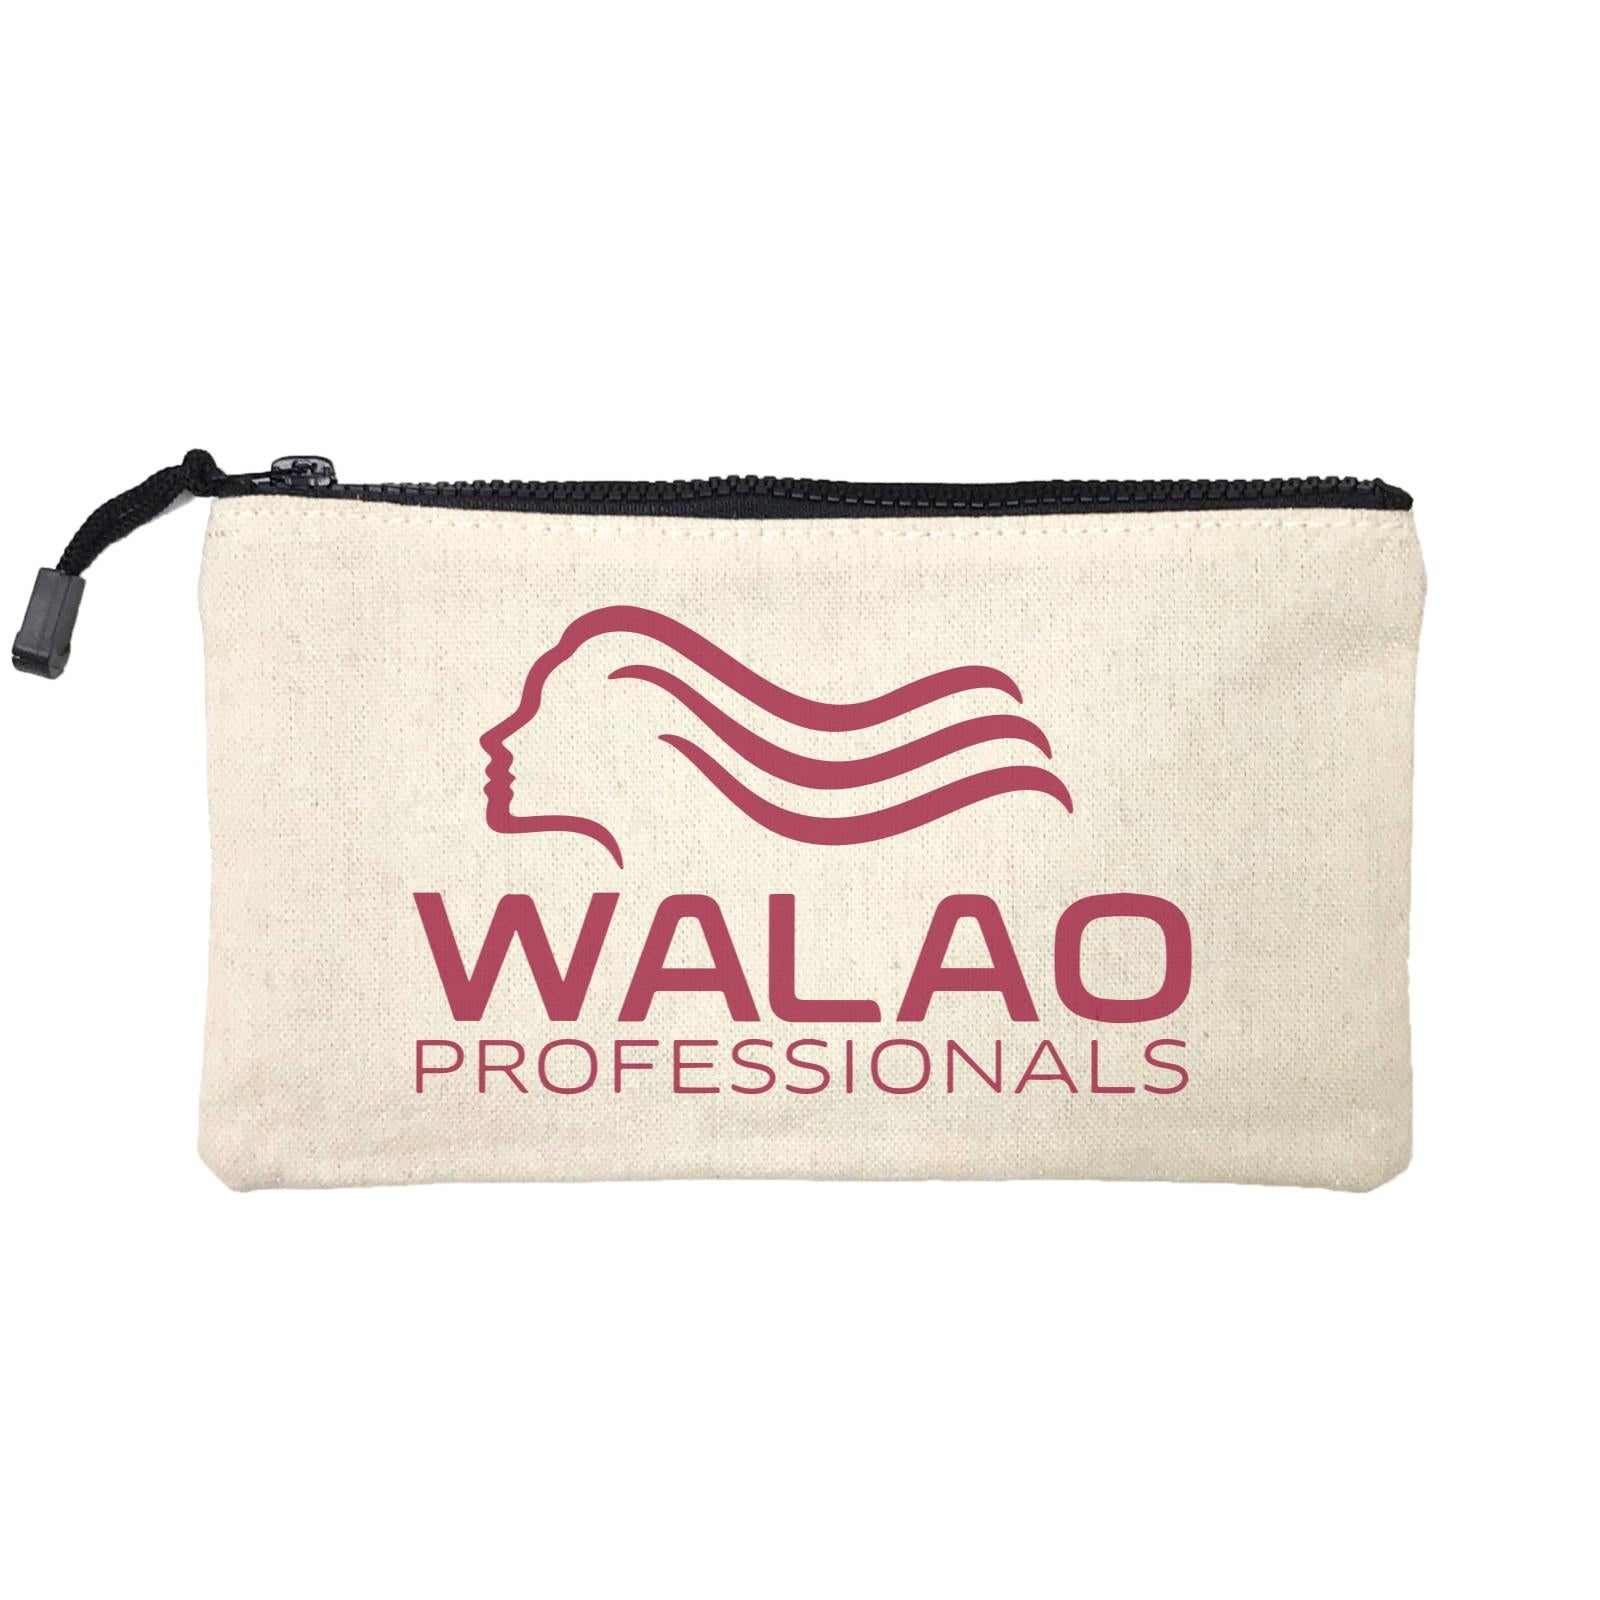 Slang Statement Walao Professional SP Stationery Pouch